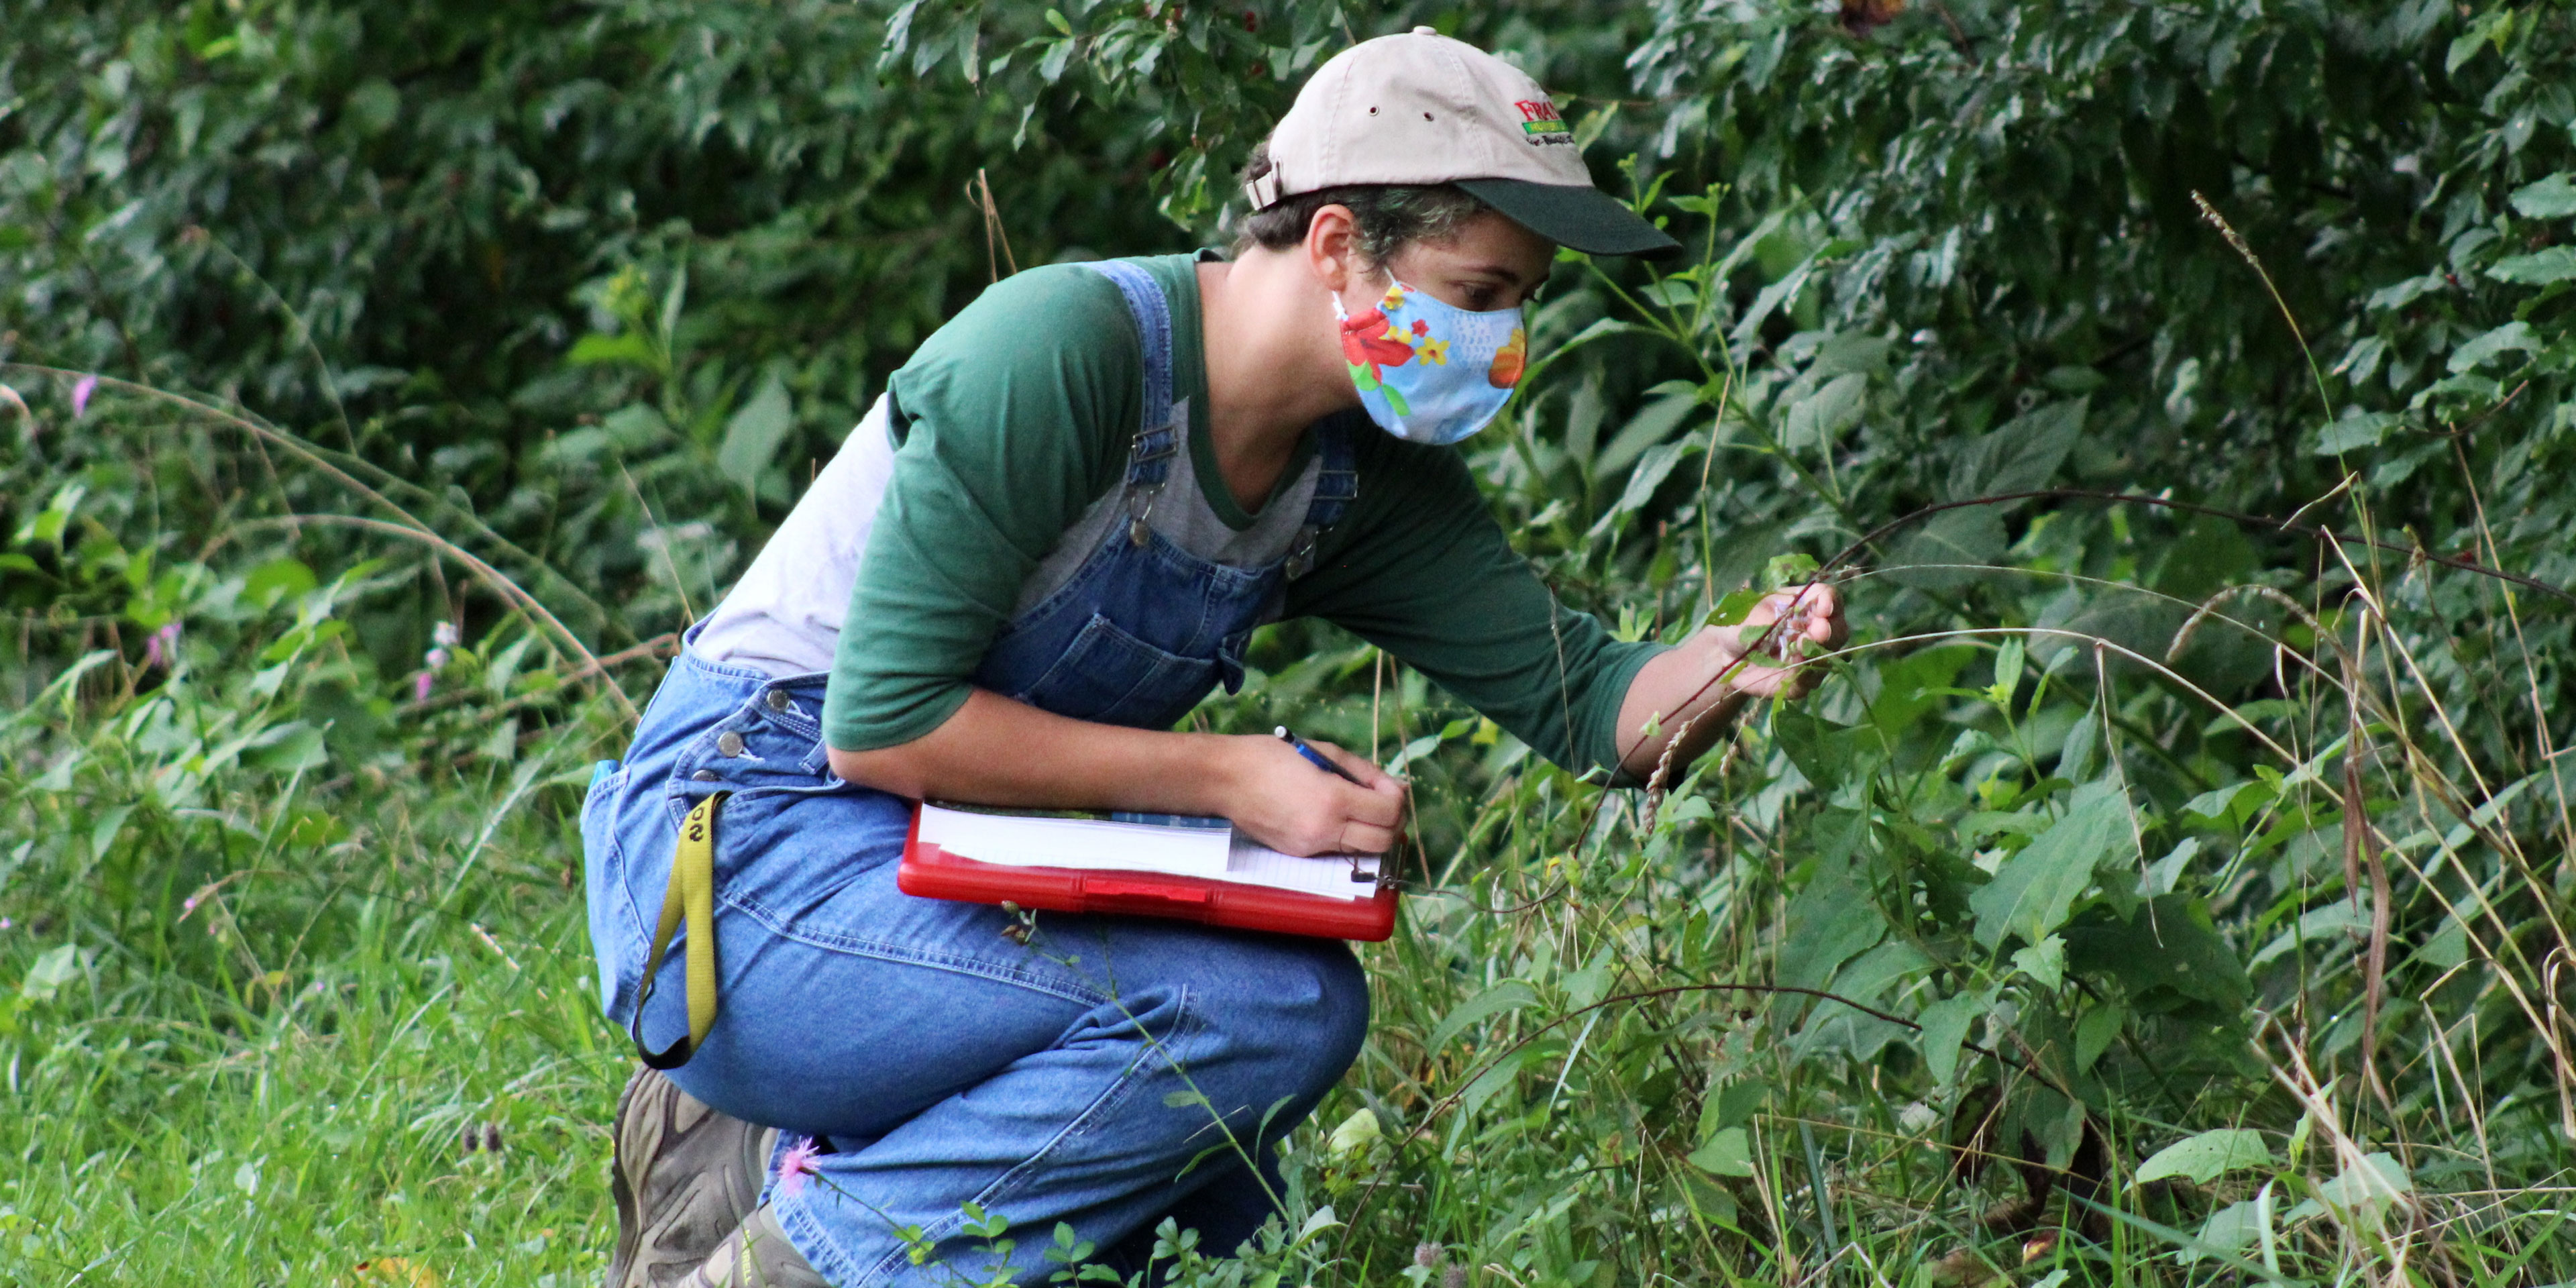 A young woman wearing a face mask outside crouches down and examines a plant with one hand while holding a pen and clipboard in the other.